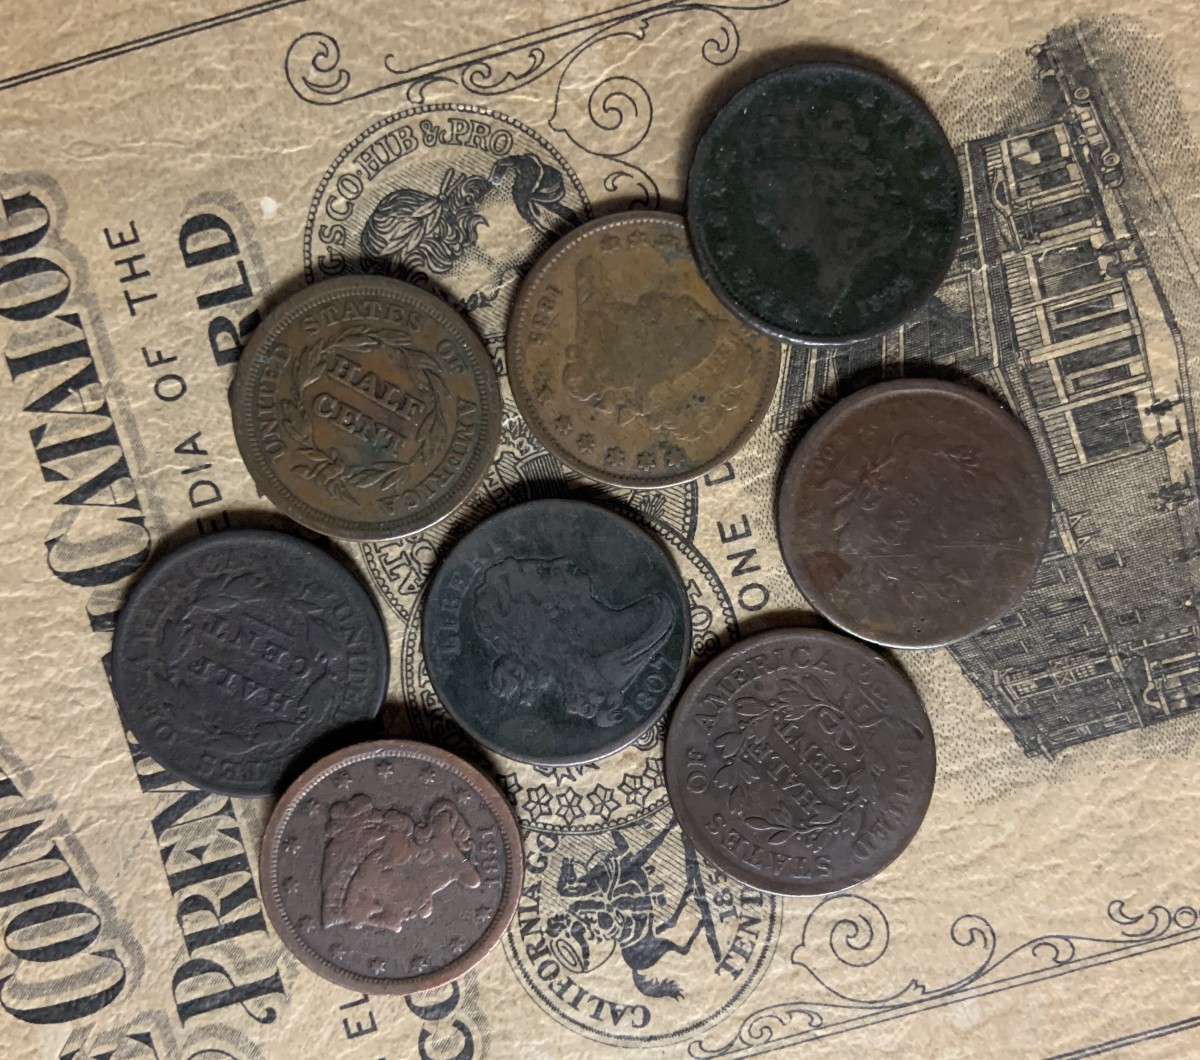 A collection of United States half cent coins.